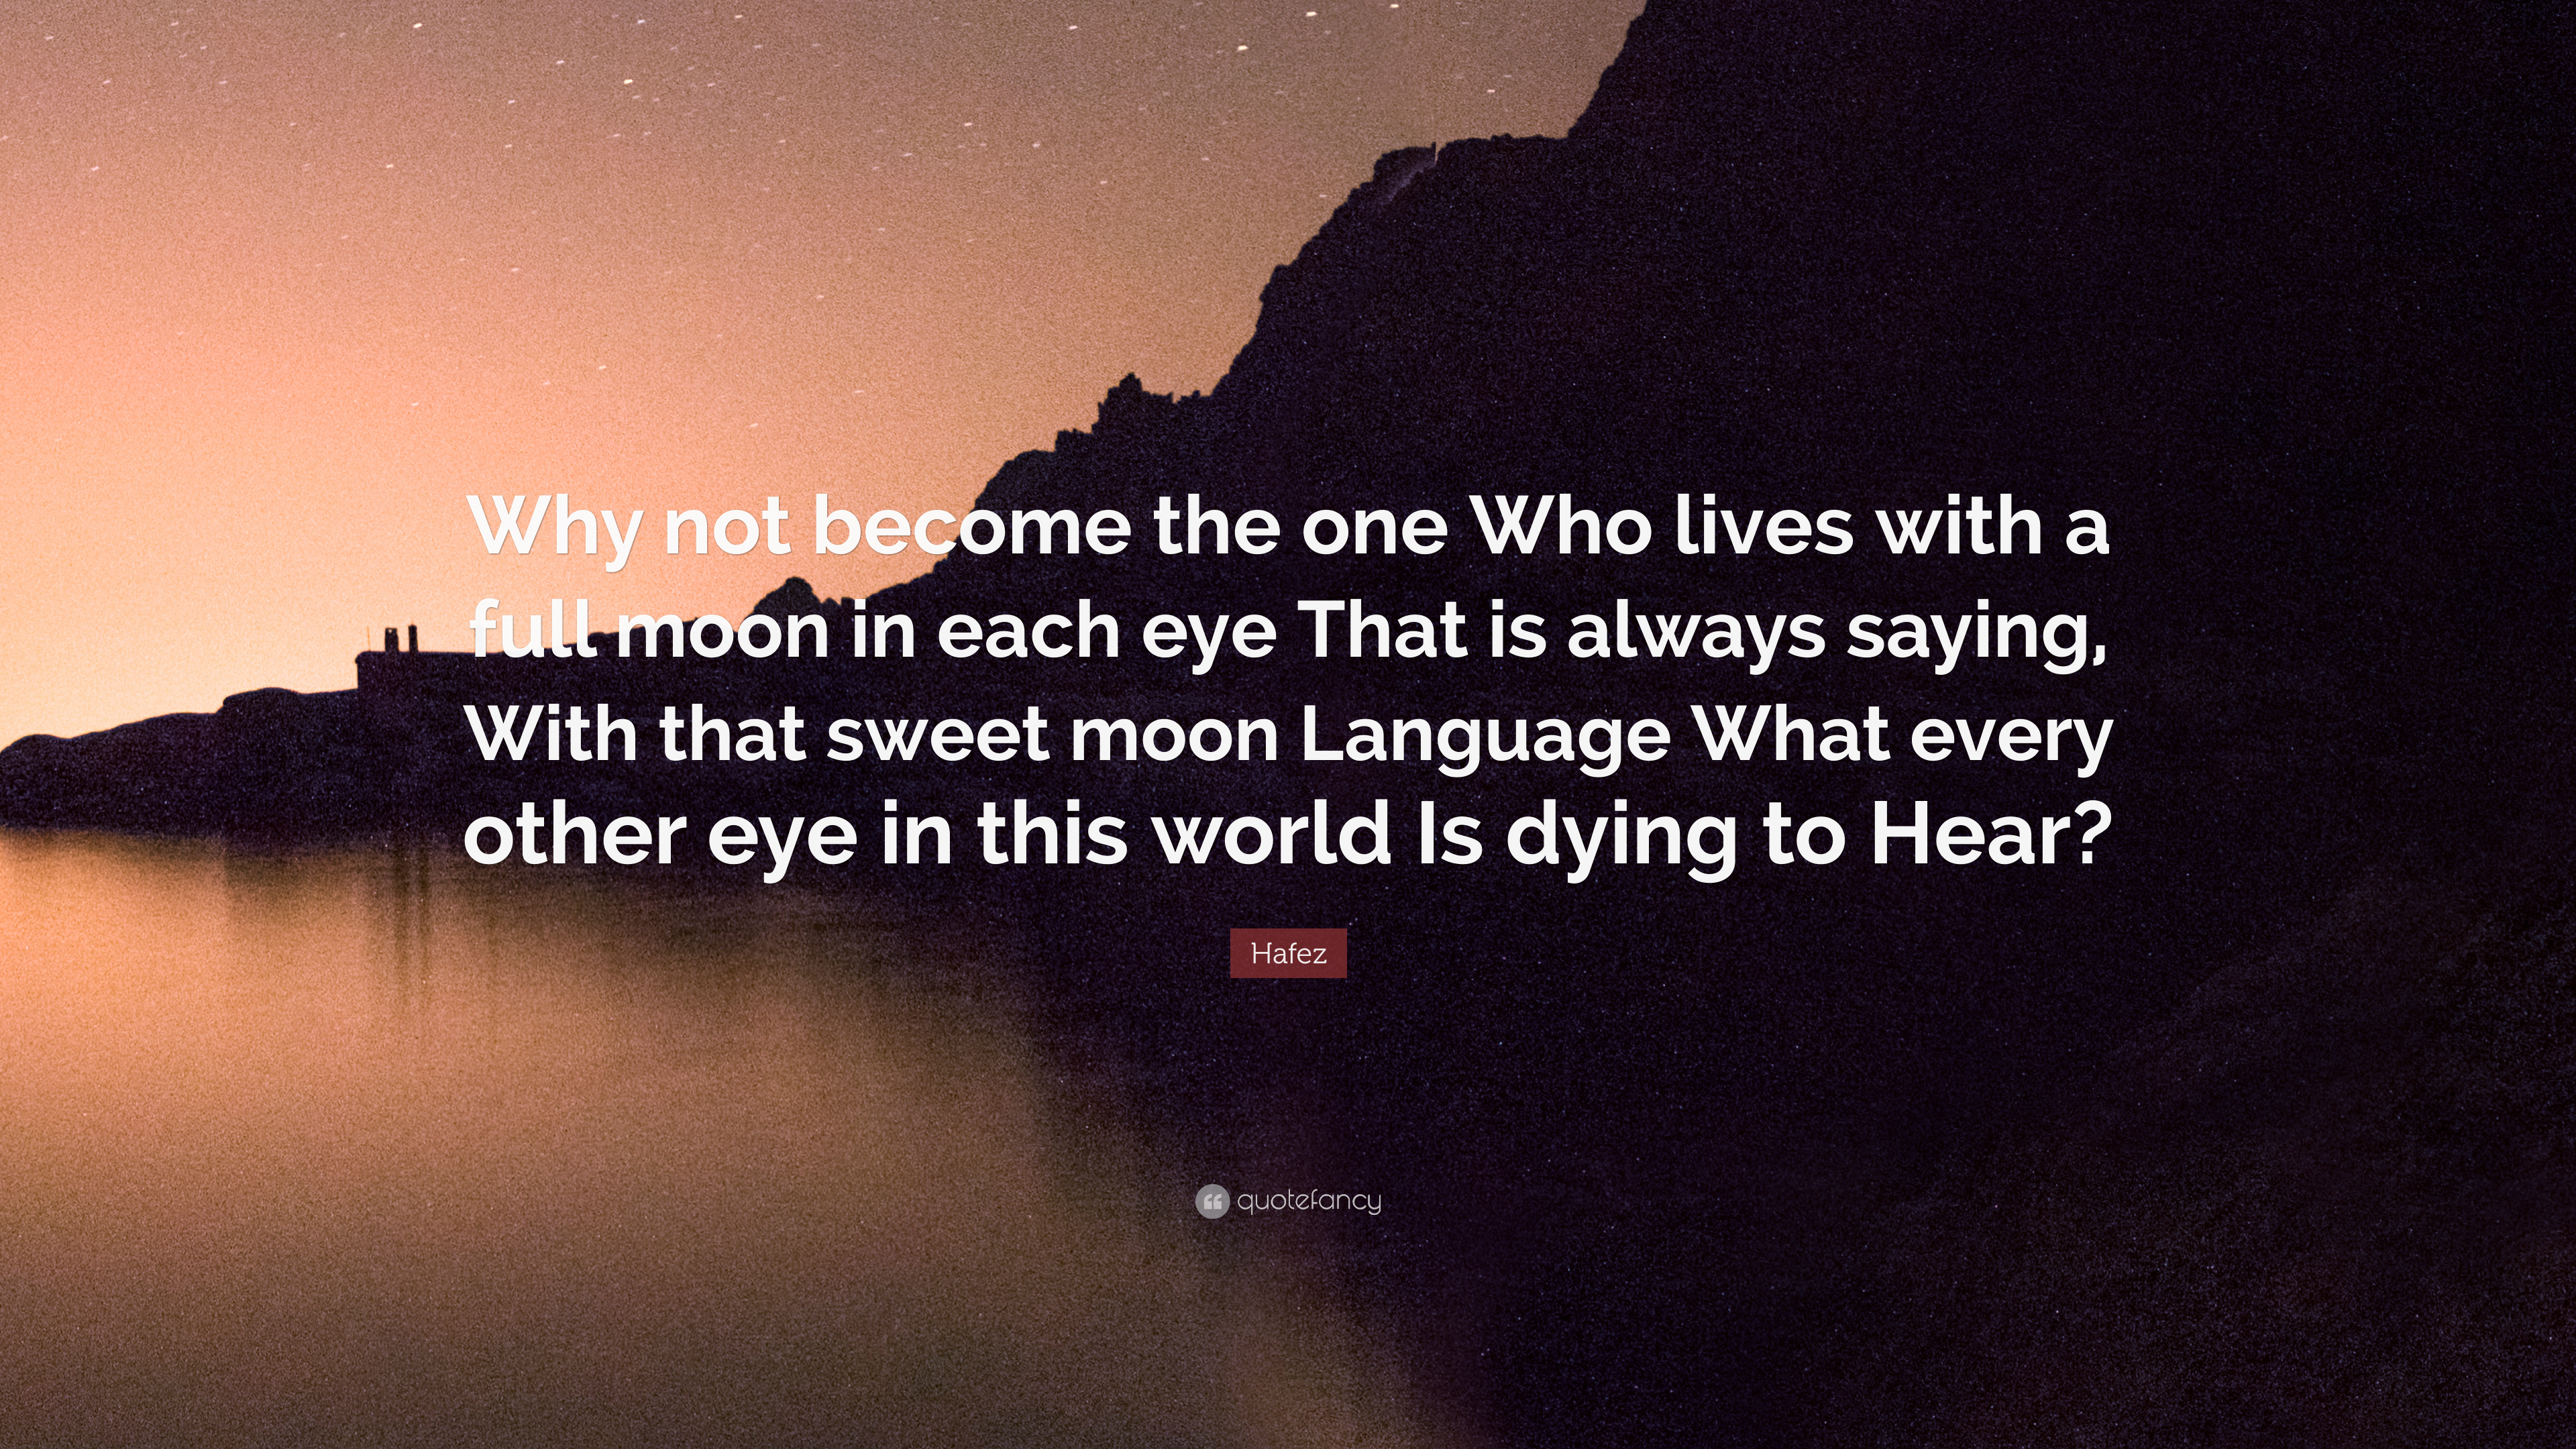 Hafez Quote: "Why not become the one Who lives with a full moon in eac...